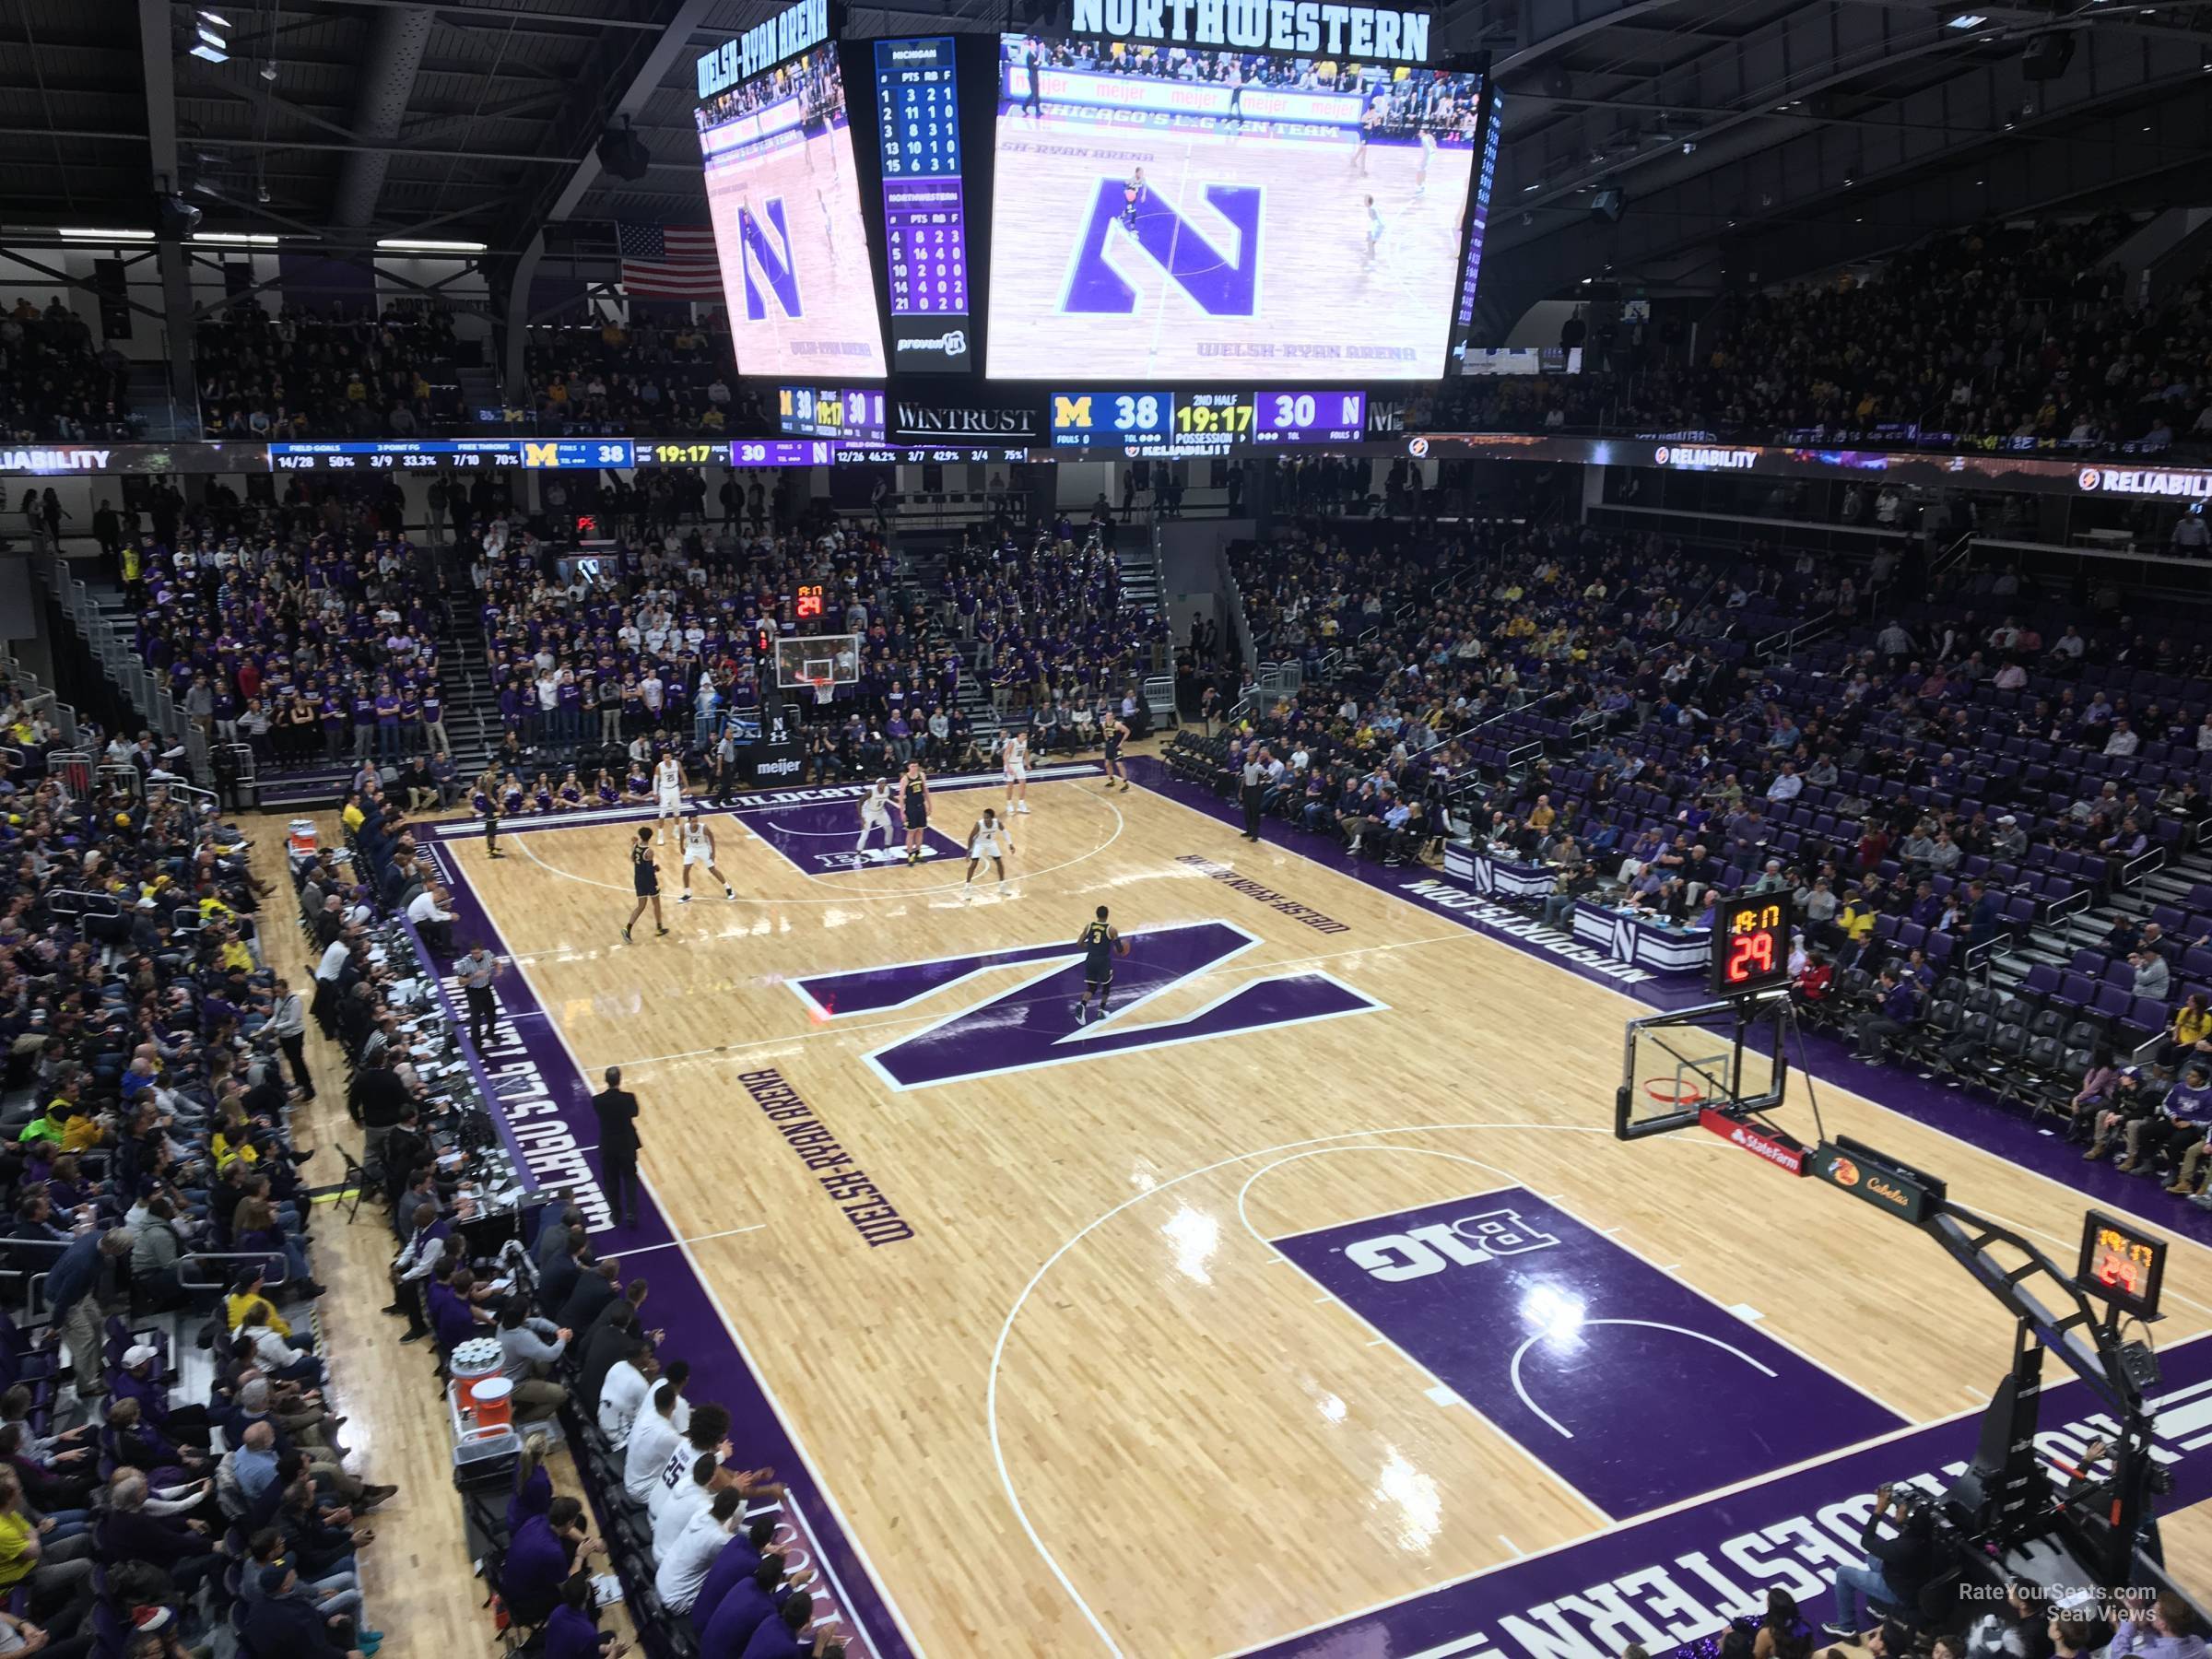 section 205, row 1 seat view  - welsh-ryan arena